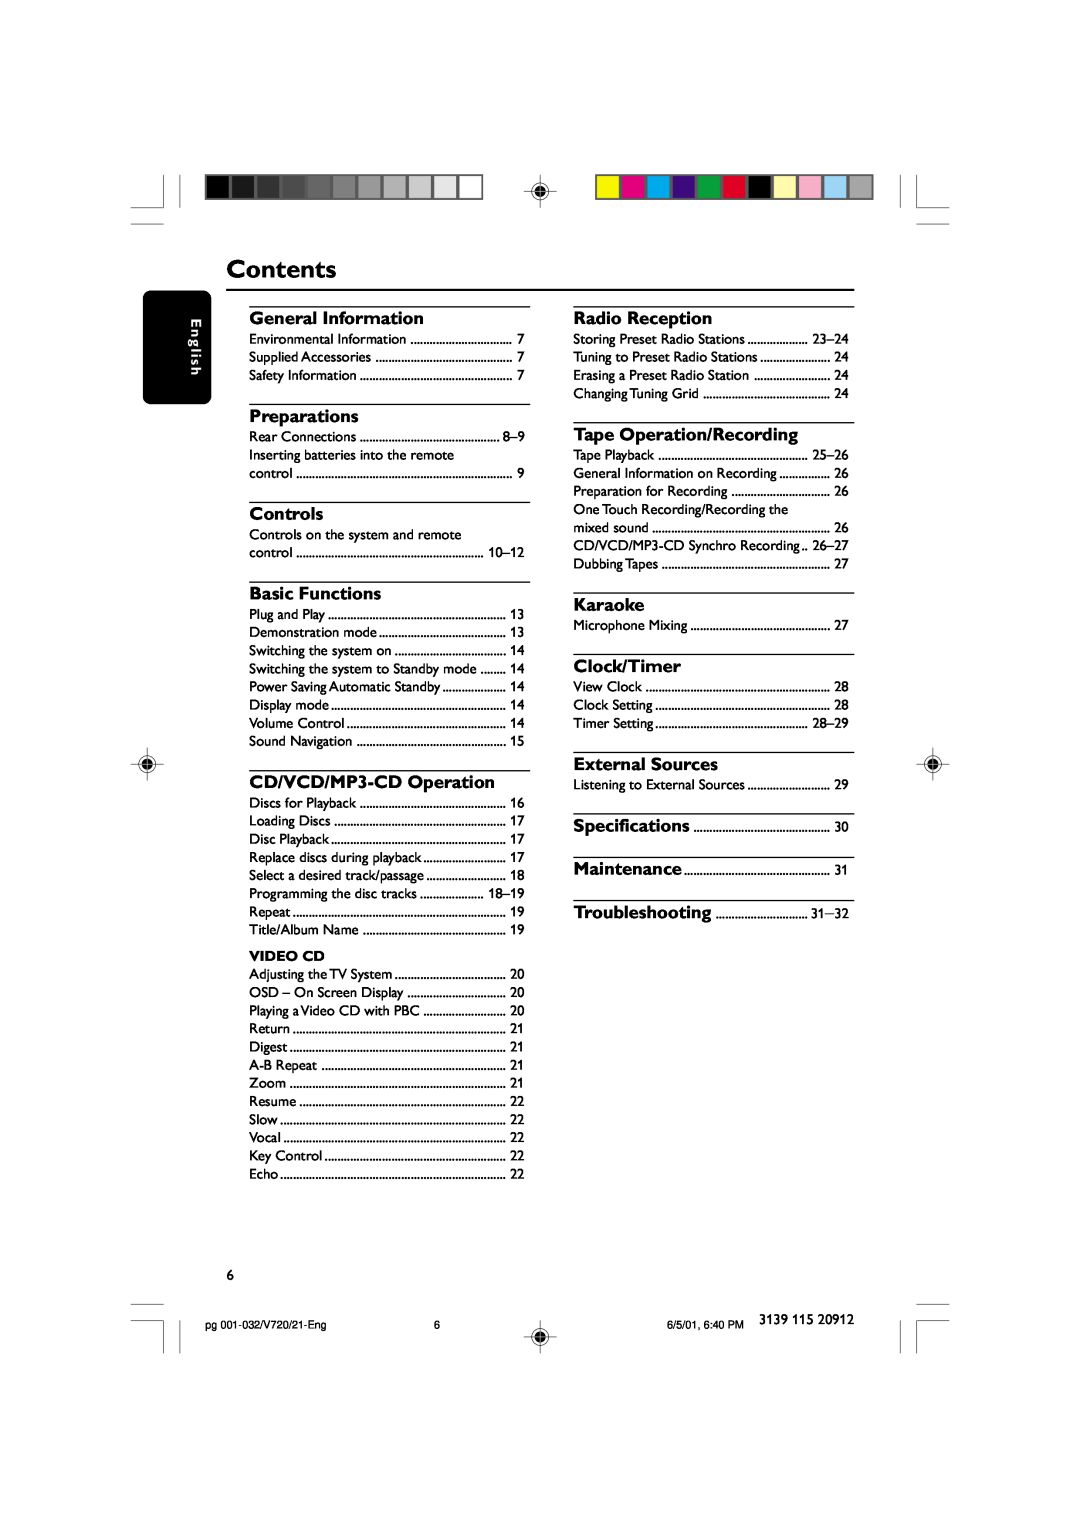 Philips FW-V720 manual Contents 